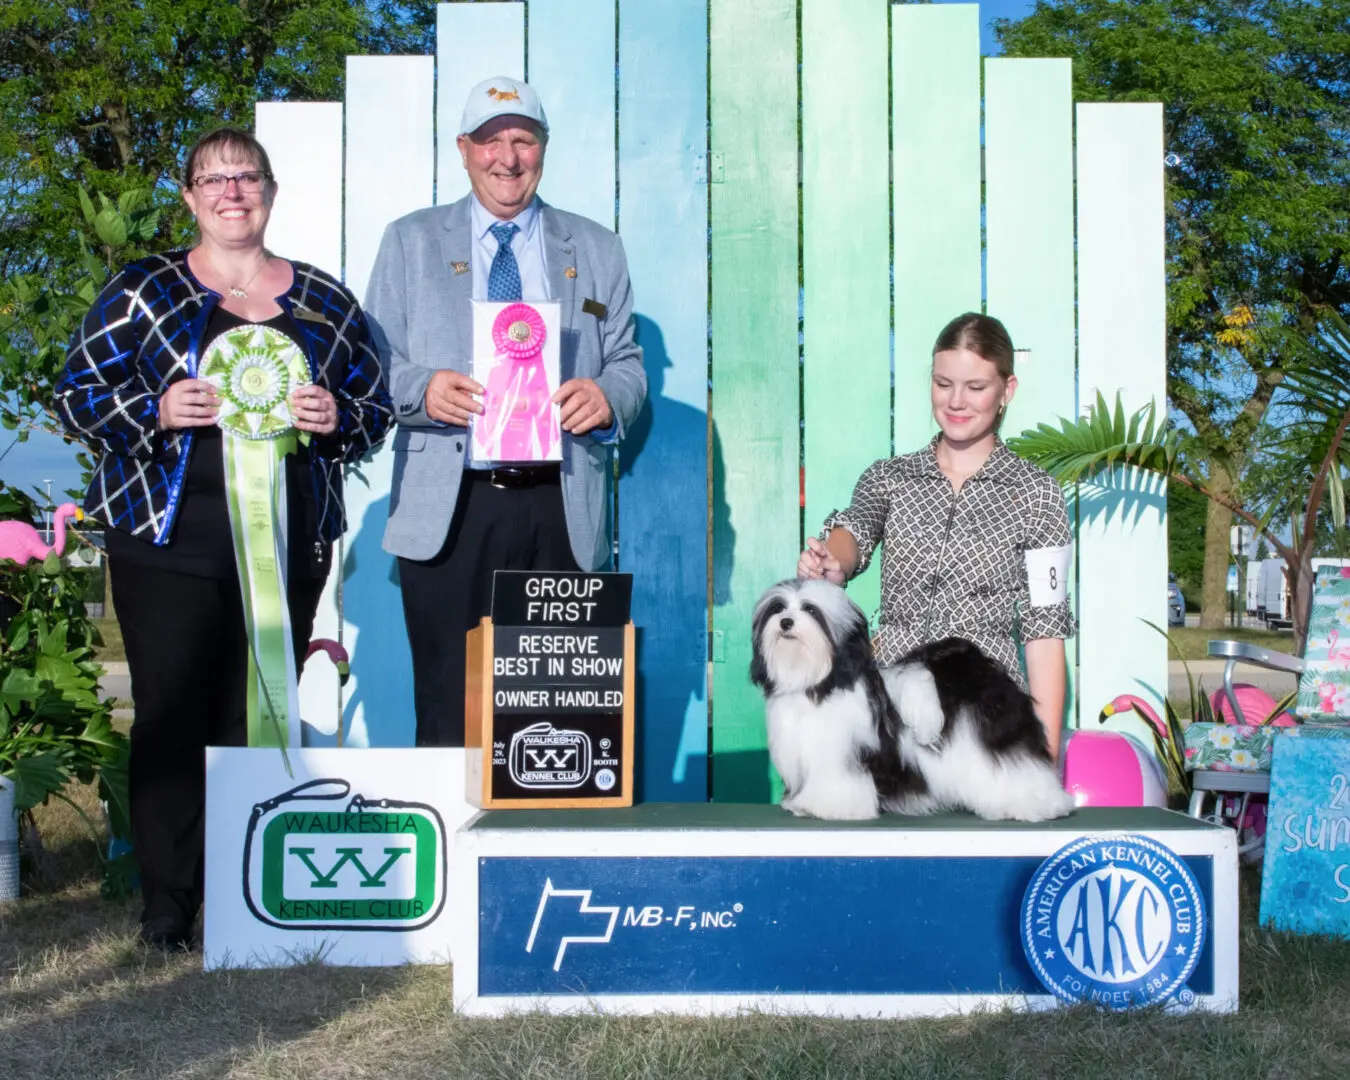 A group of people posing with their Havanese show dogs at a dog show.